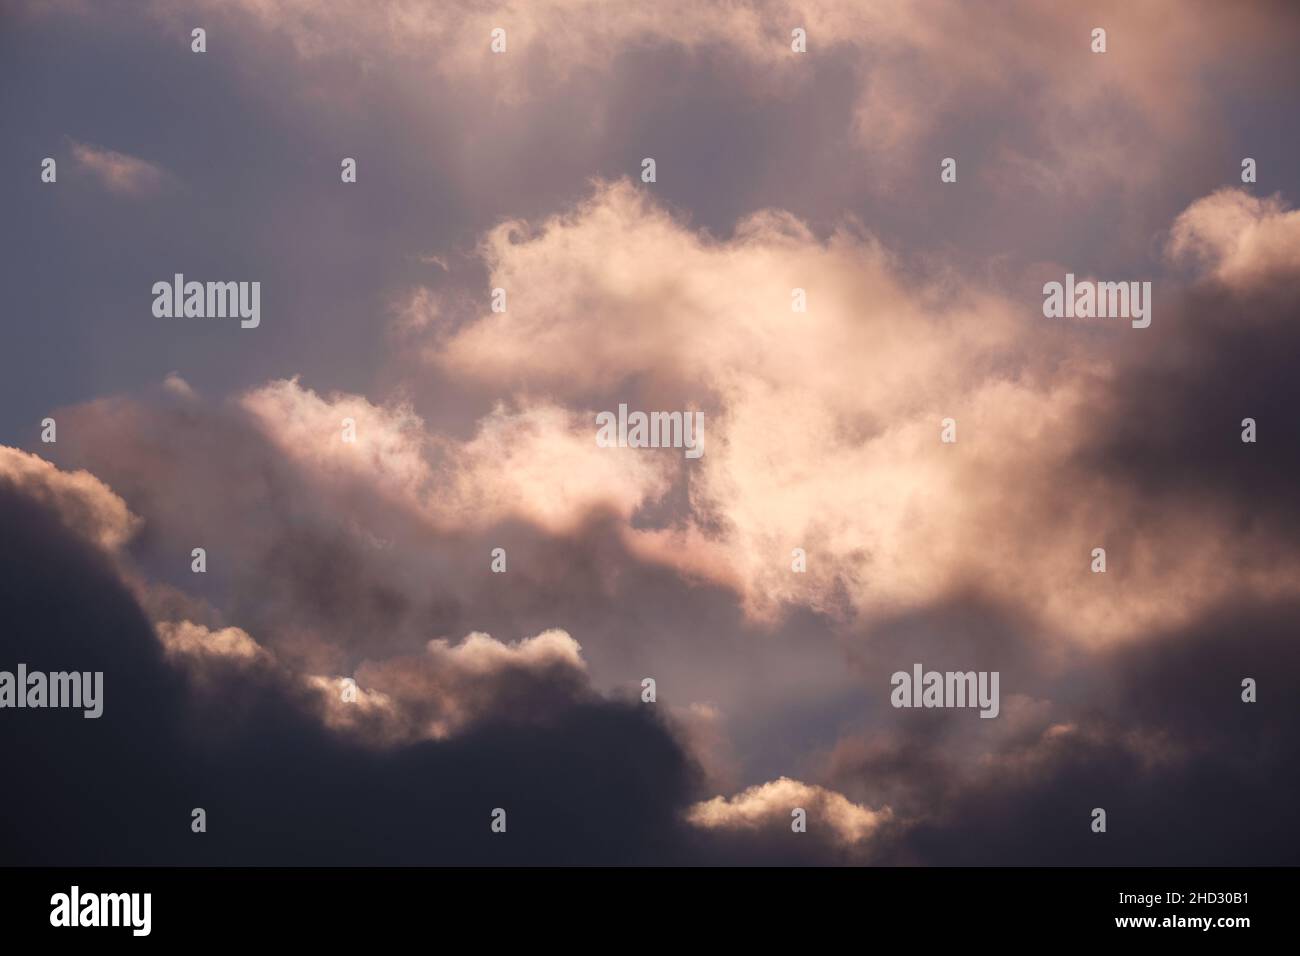 Close up frame of dramatic sunset clouds. Stock Photo